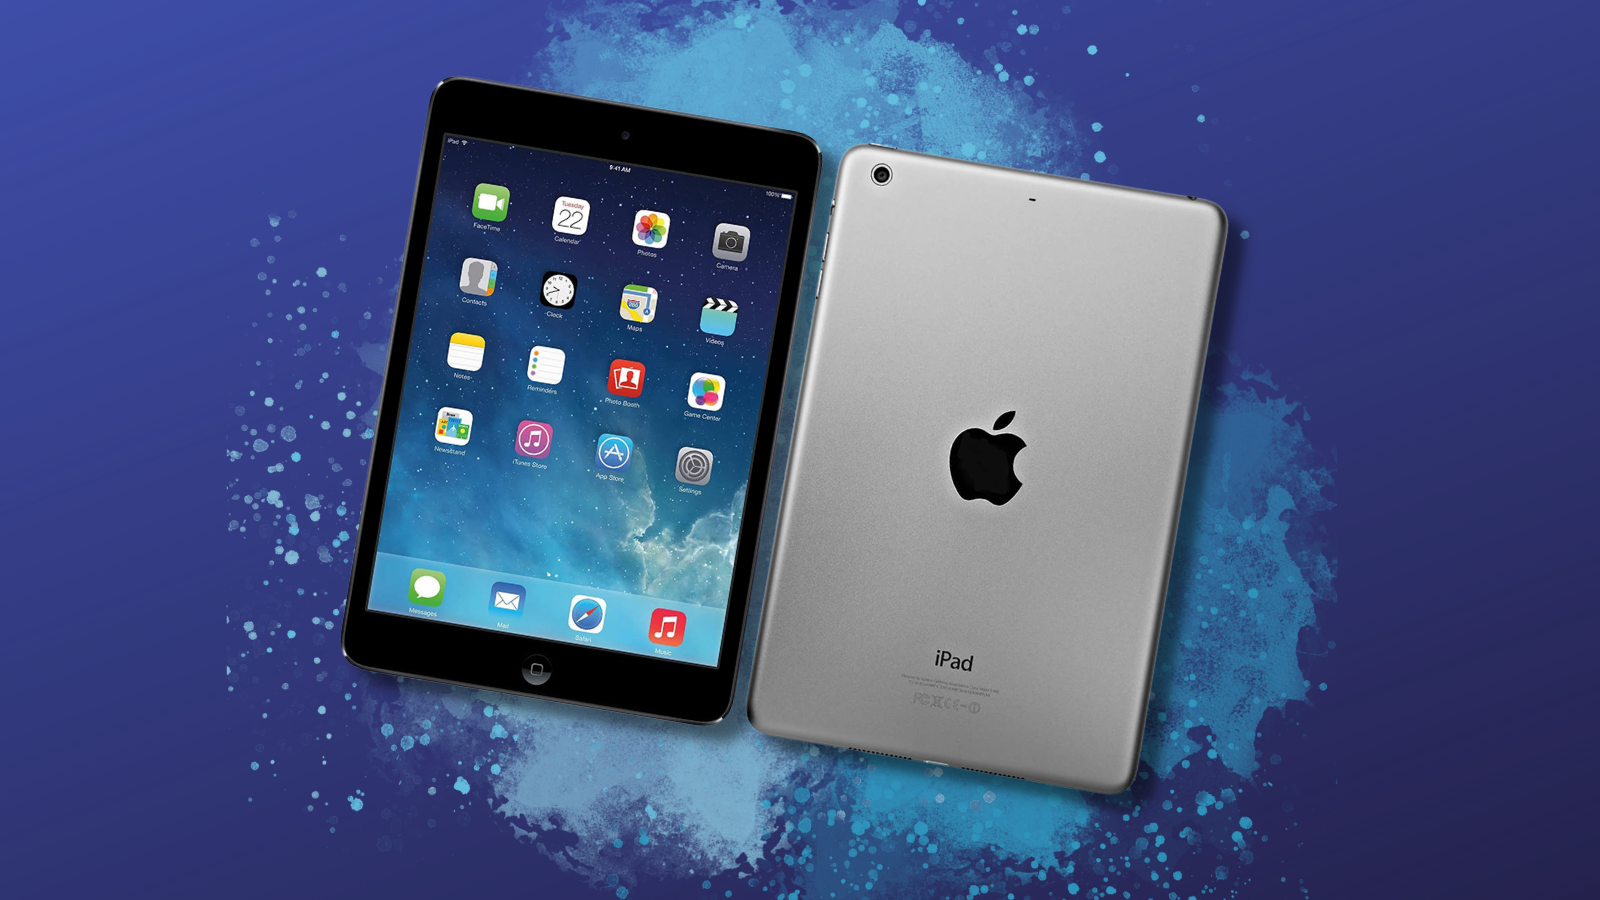 ipad air from front and back angle with blue background